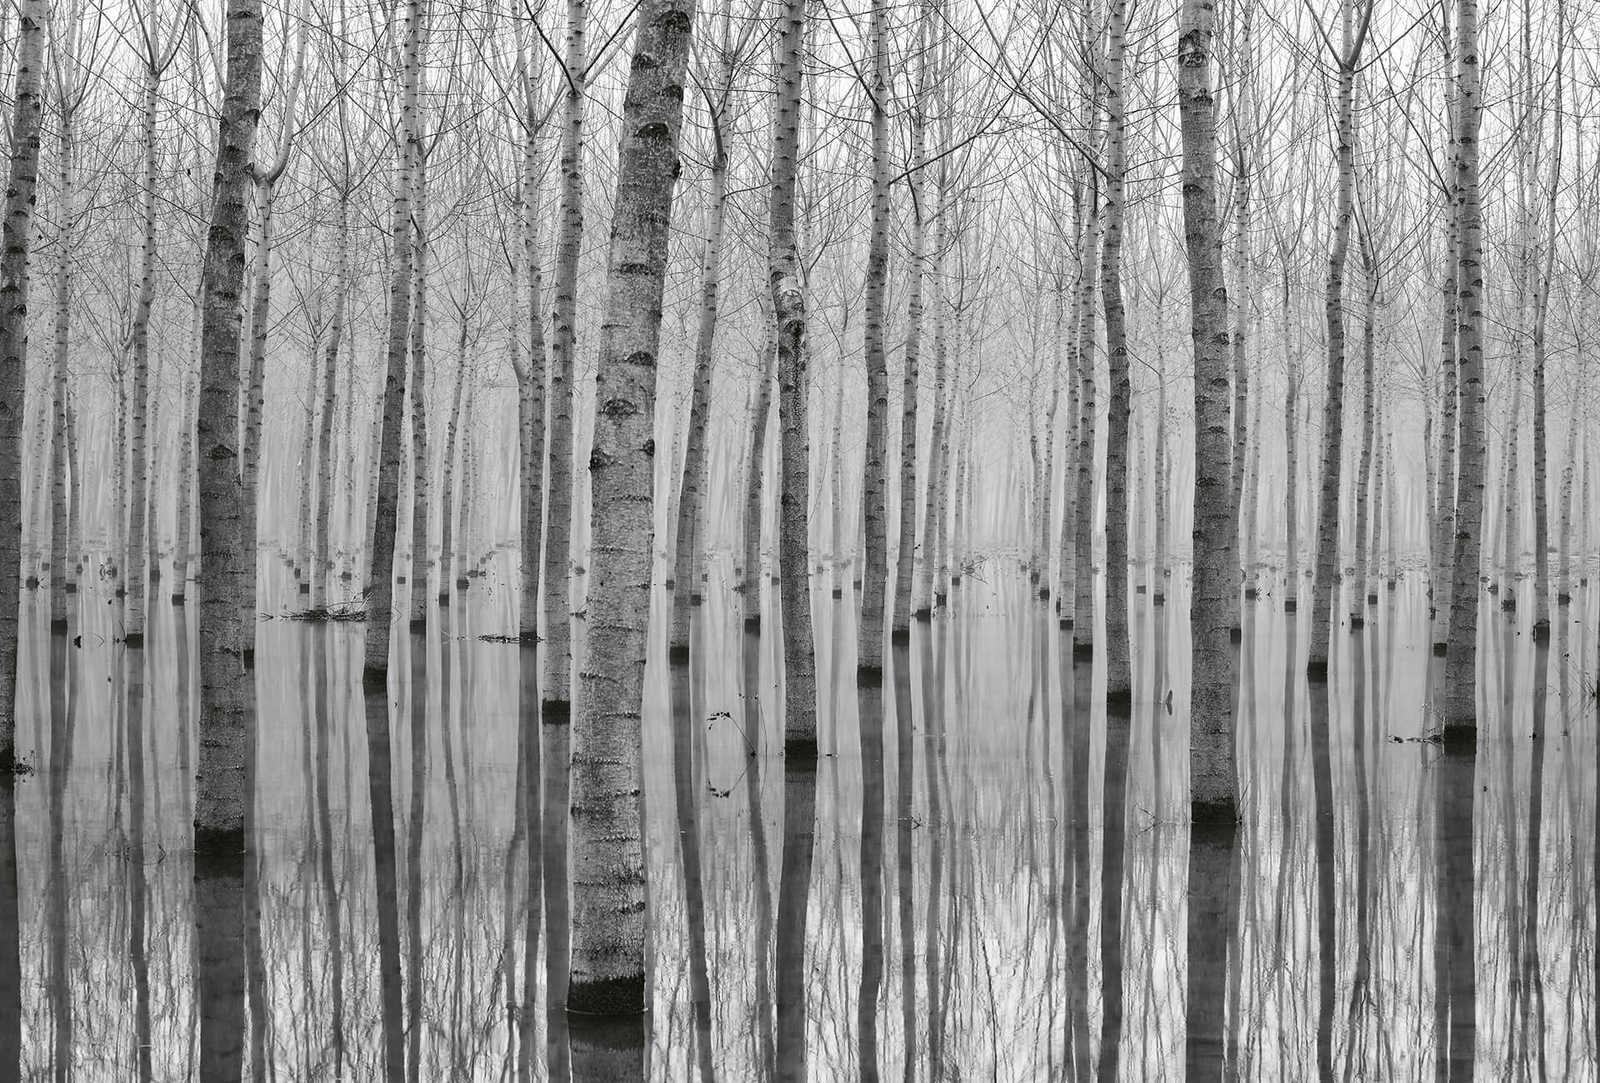         Photo wallpaper forest birch trees in water - black, white, grey
    